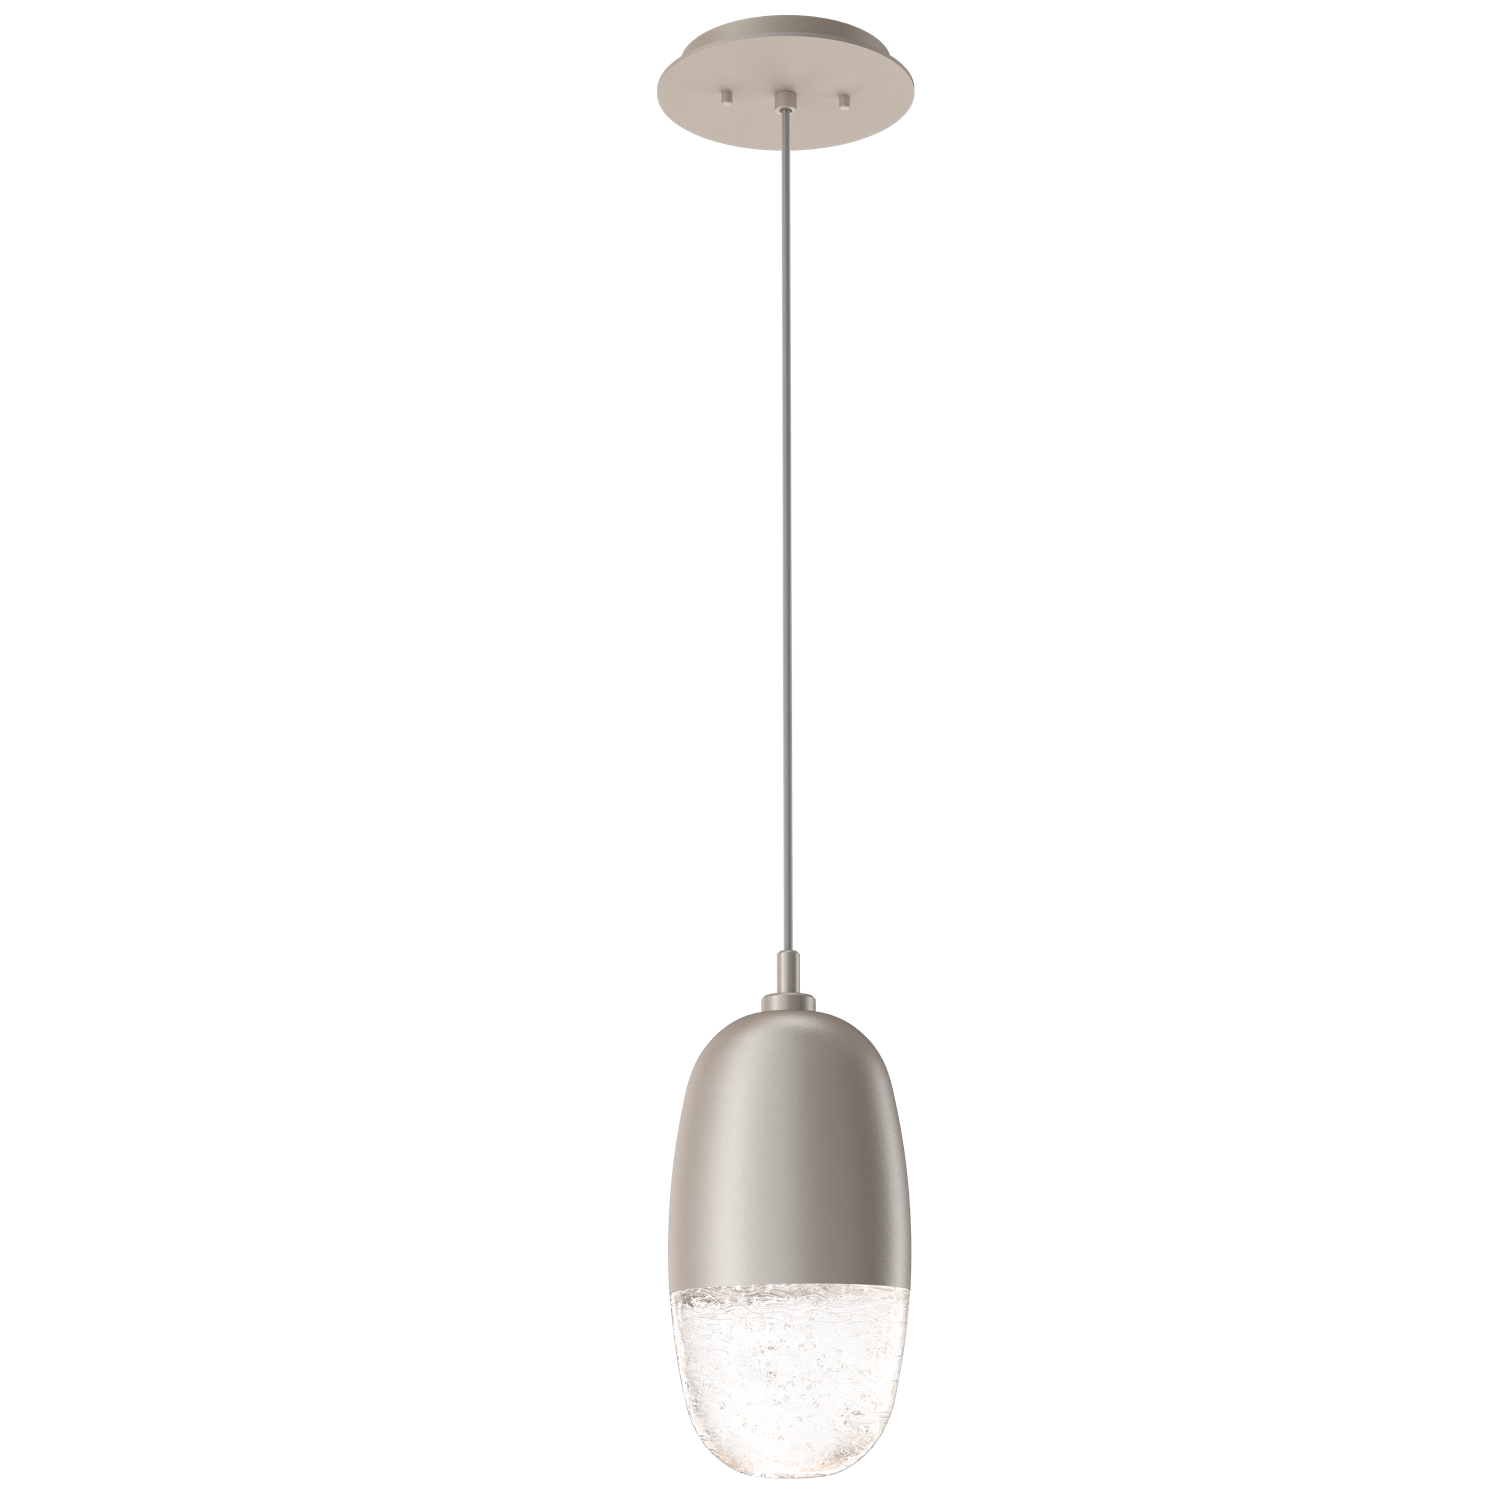 LAB0079-01-BS-Hammerton-Studio-Pebble-pendant-light-with-metallic-beige-silver-finish-and-clear-cast-glass-shades-and-LED-lamping